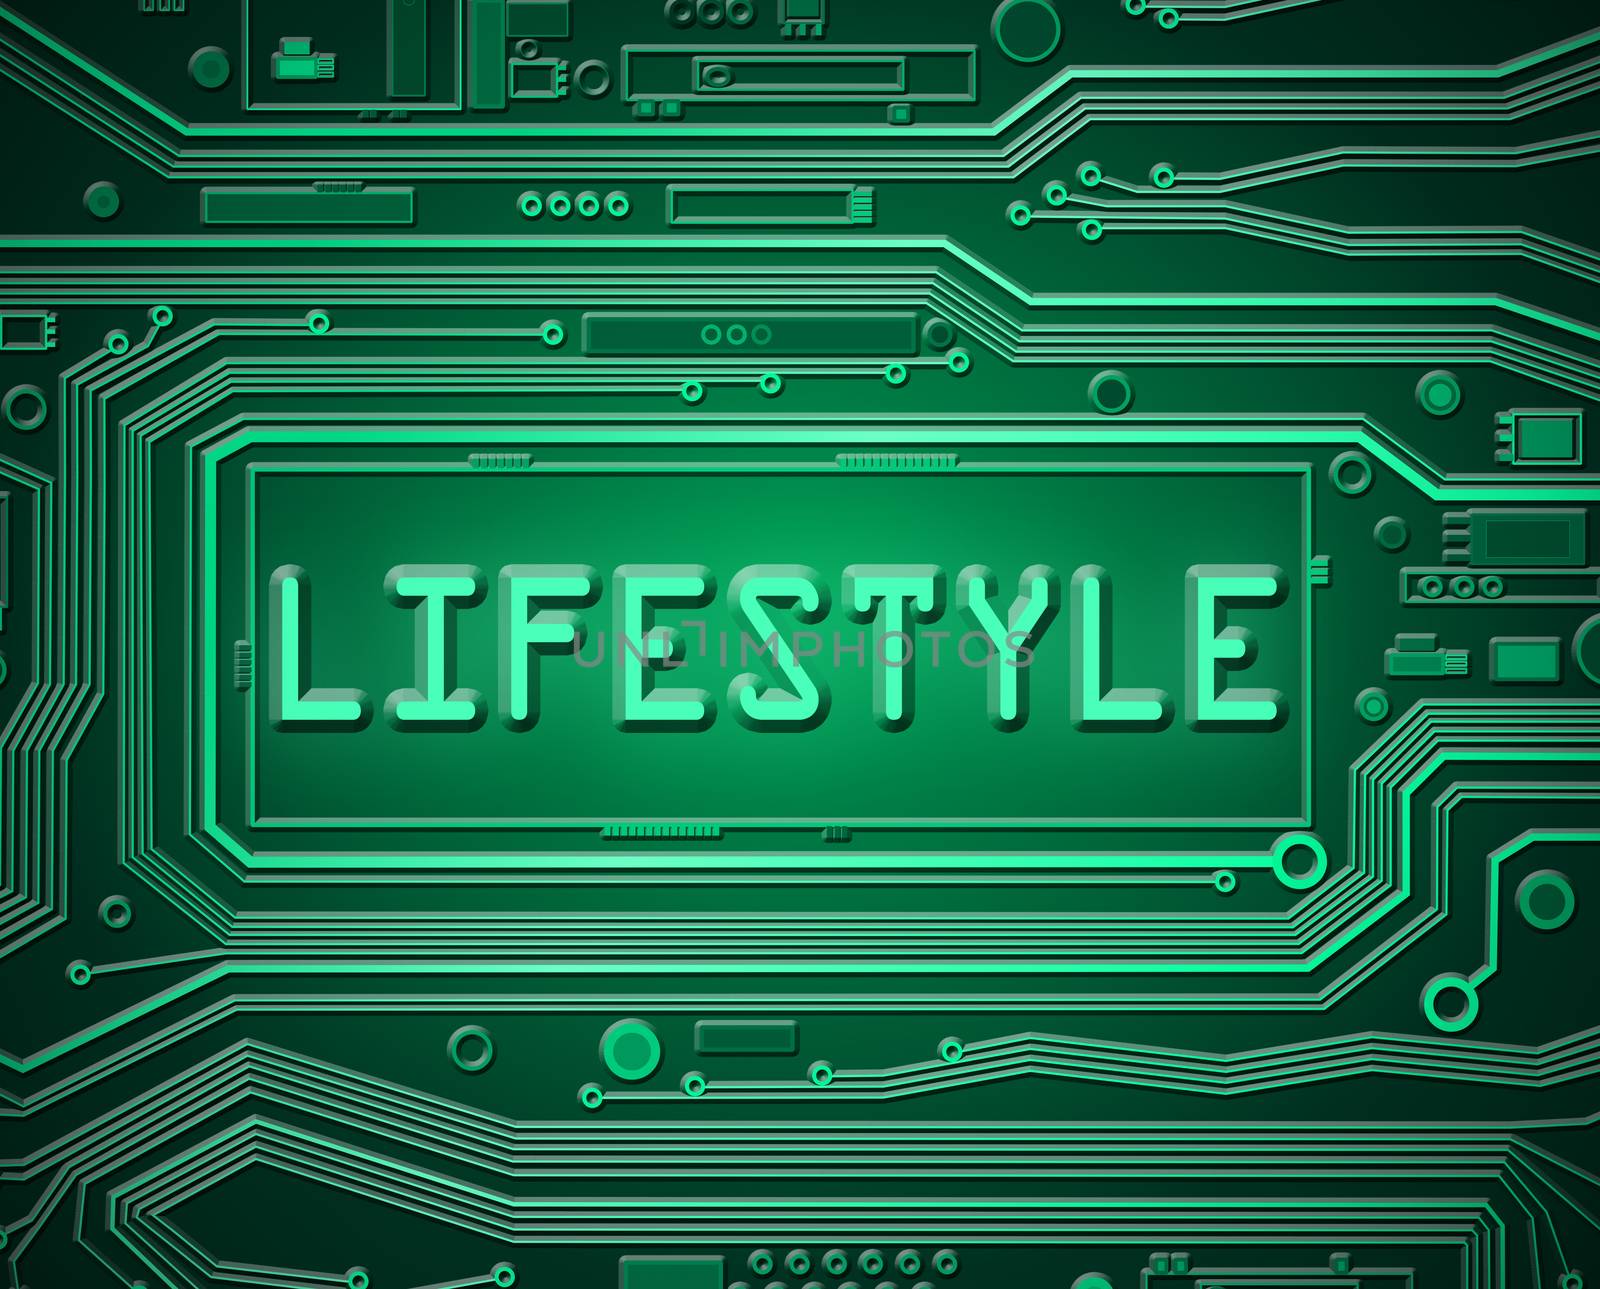 Abstract style illustration depicting printed circuit board components with a lifestyle concept.